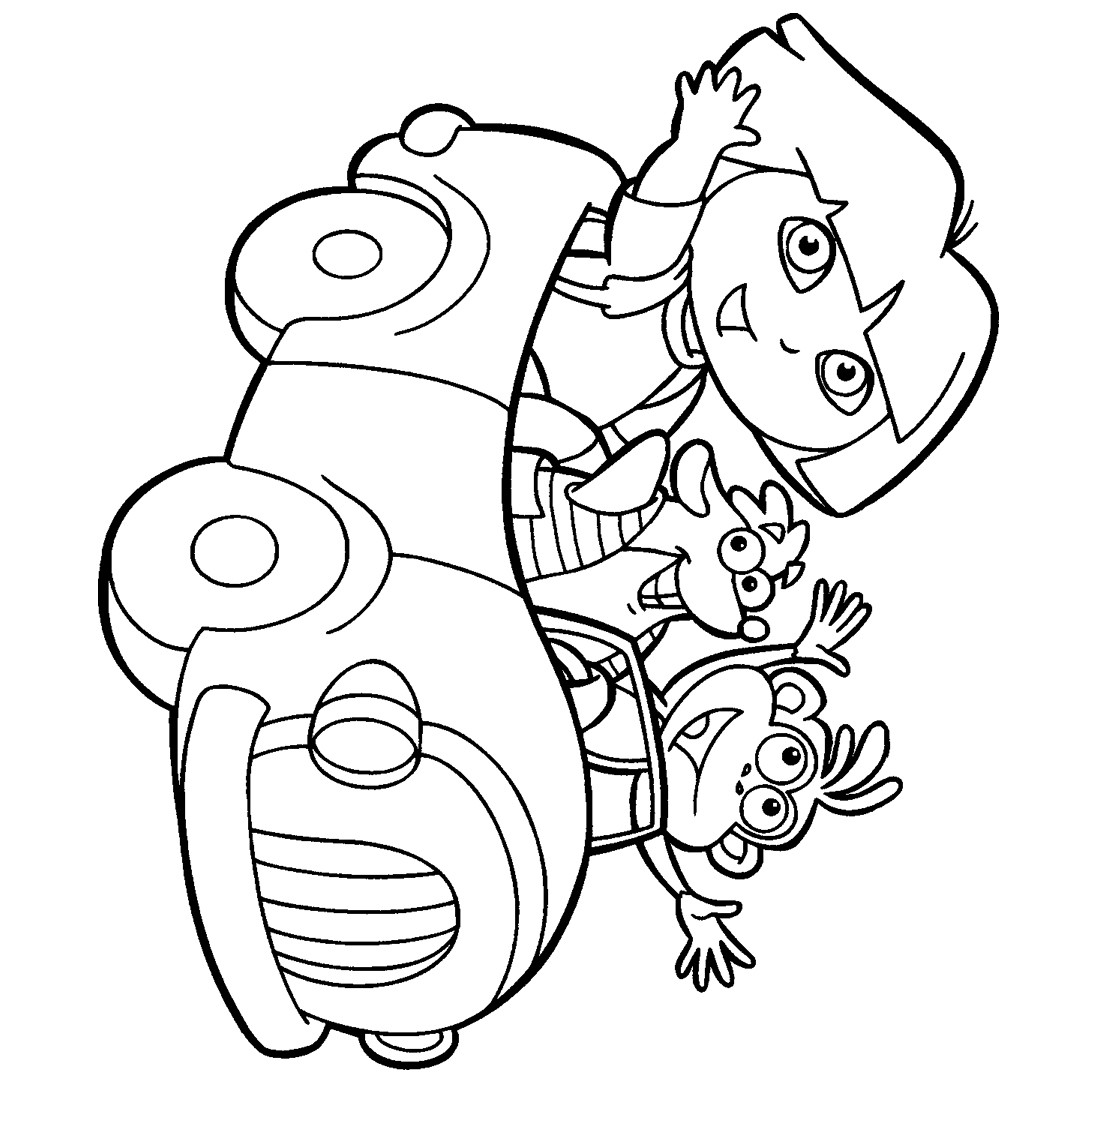 Kids Coloring Pages Online
 Printable coloring pages for kids